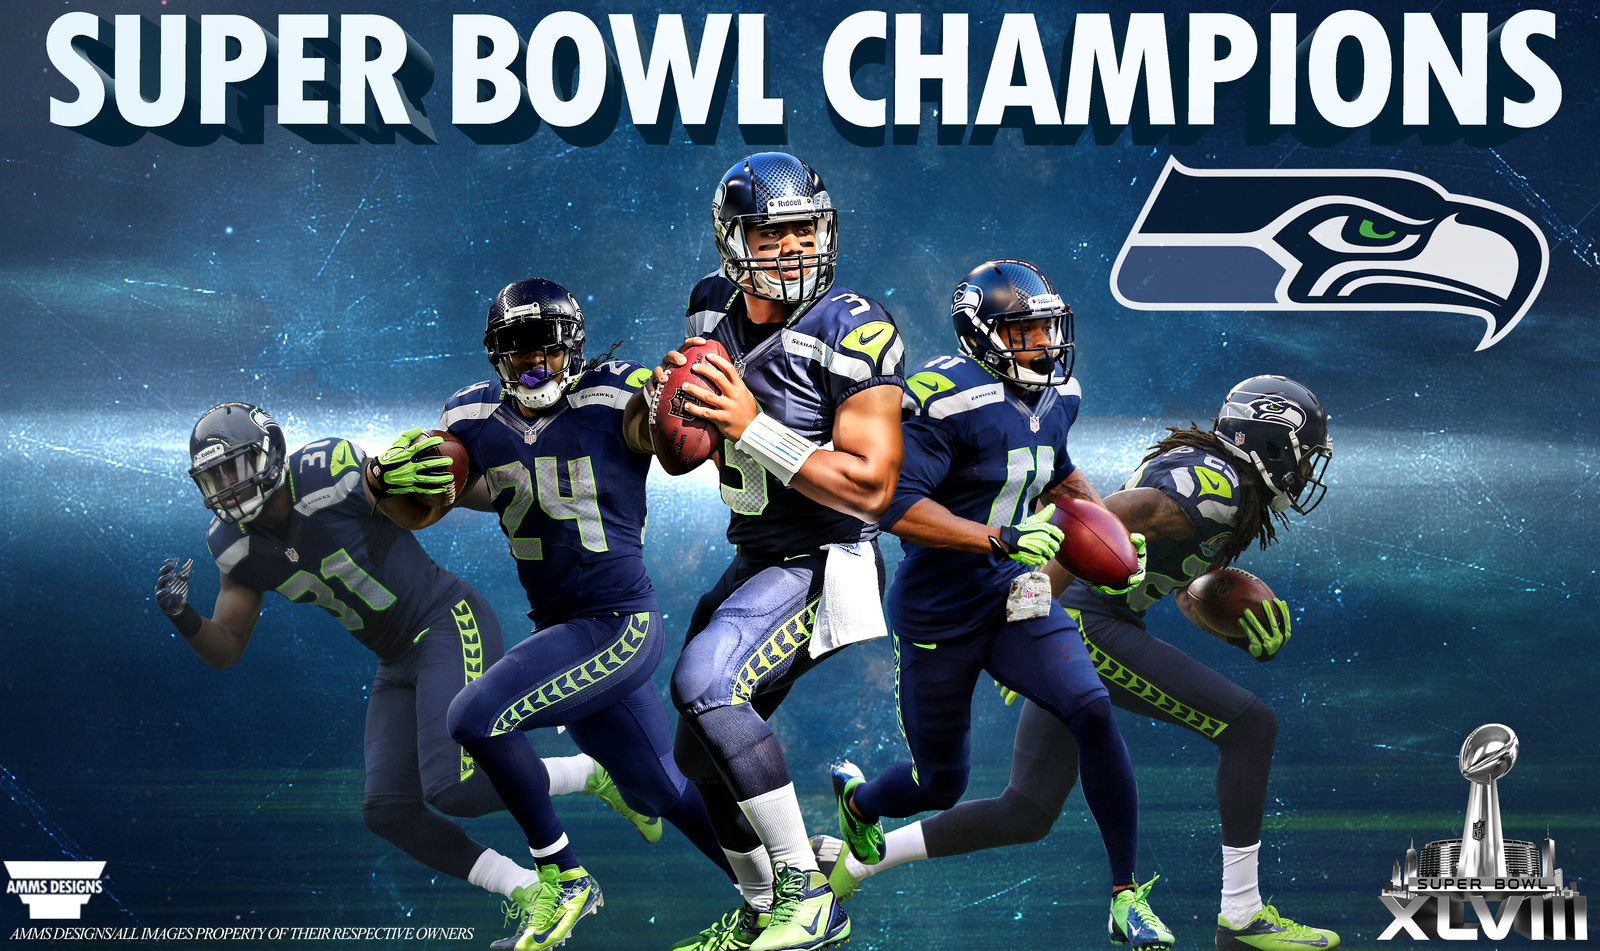 Seahawks Super Bowl 48 Champions Poster by AMMSDesings